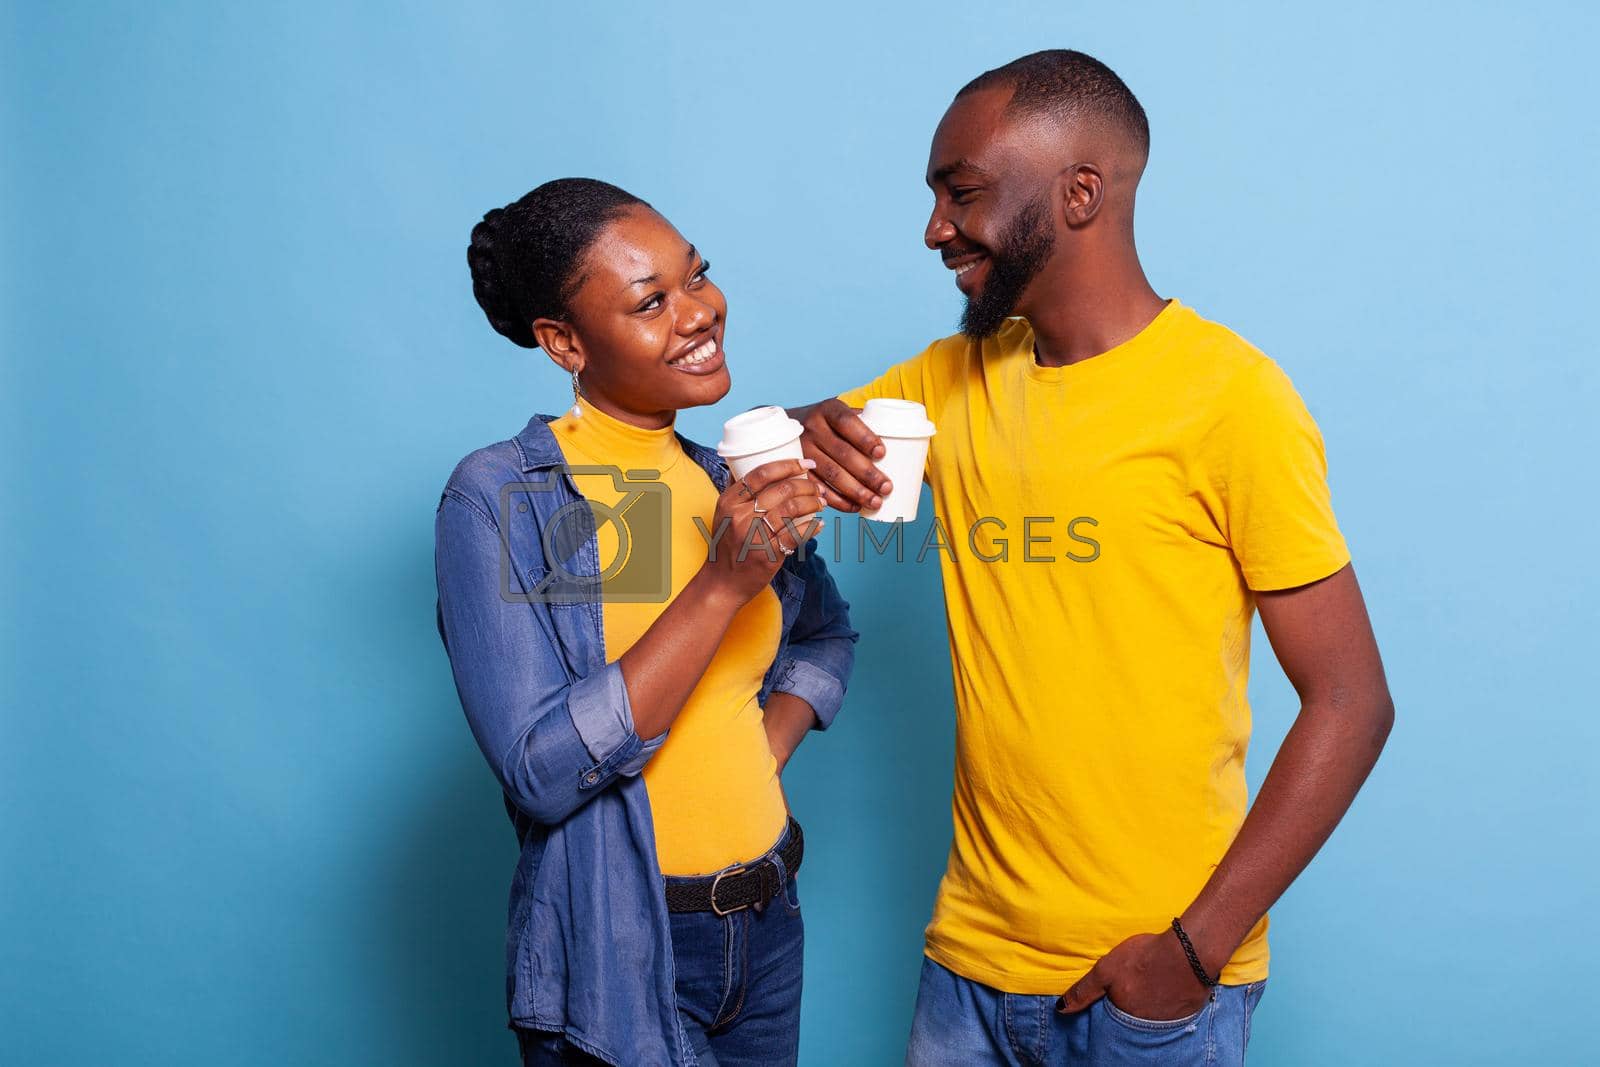 Cheerful couple holding cup of coffee and enjoying romance in front of camera. People in relationship laughing and looking at each other. Boyfriend and girlfriend showing affection.